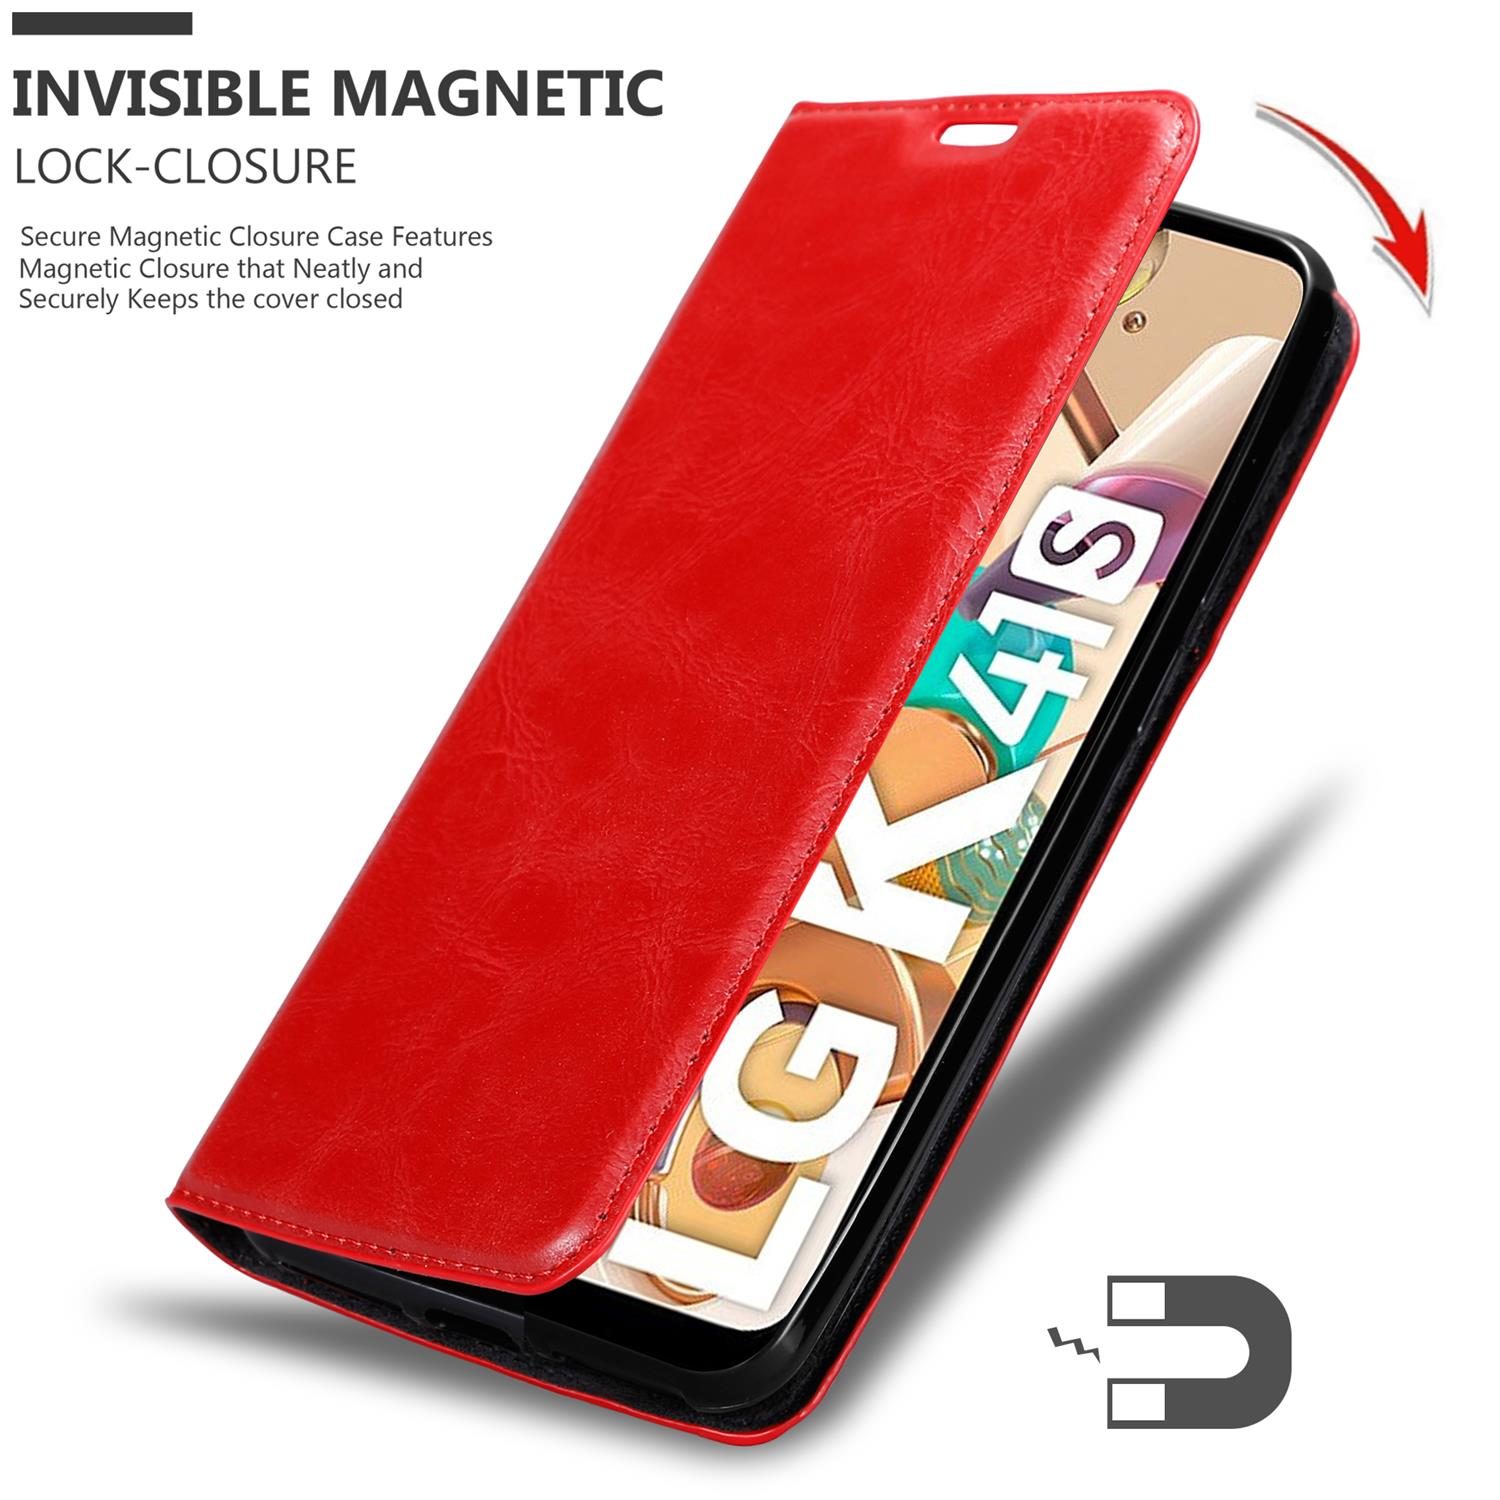 Hülle Invisible Magnet, CADORABO Bookcover, Book ROT APFEL LG, K41S,